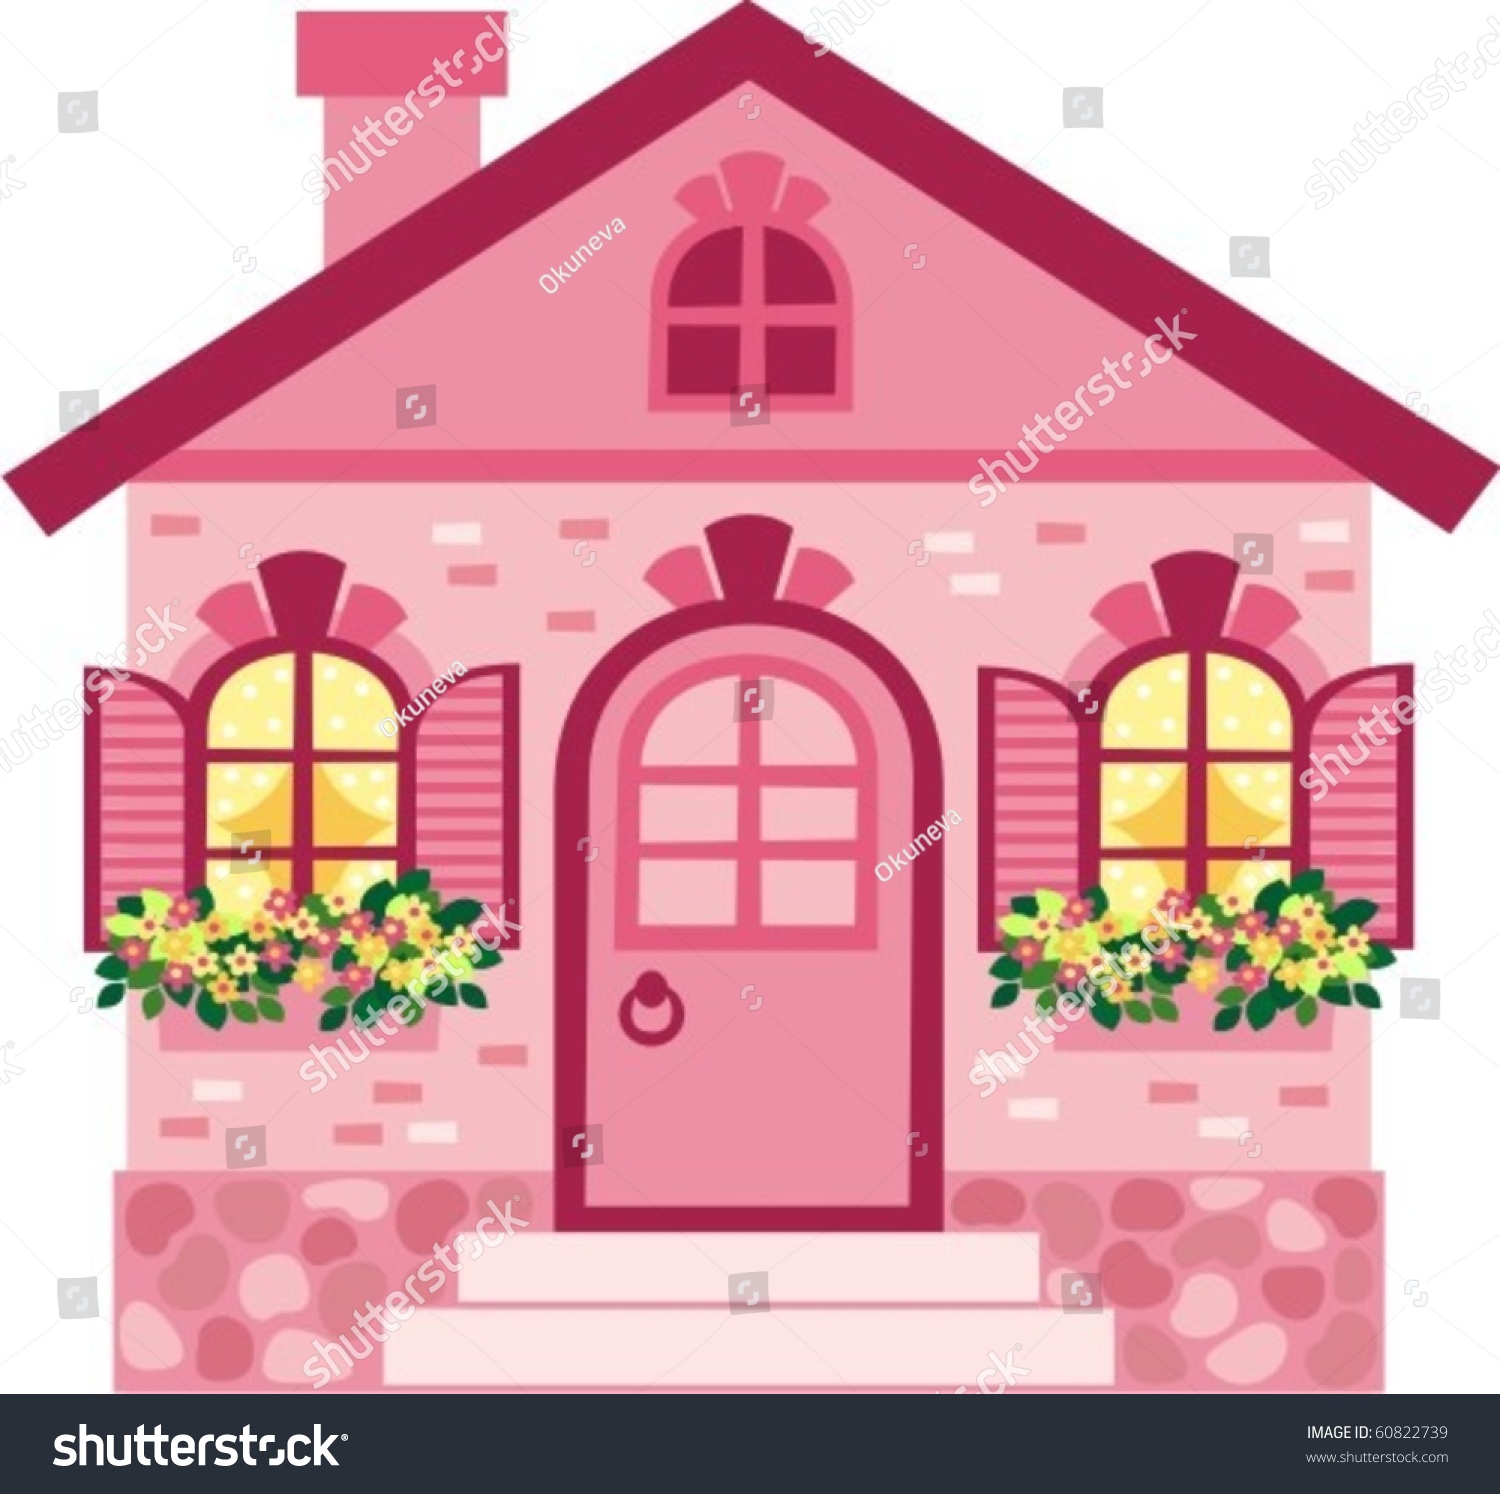 clipart house shutters - photo #19